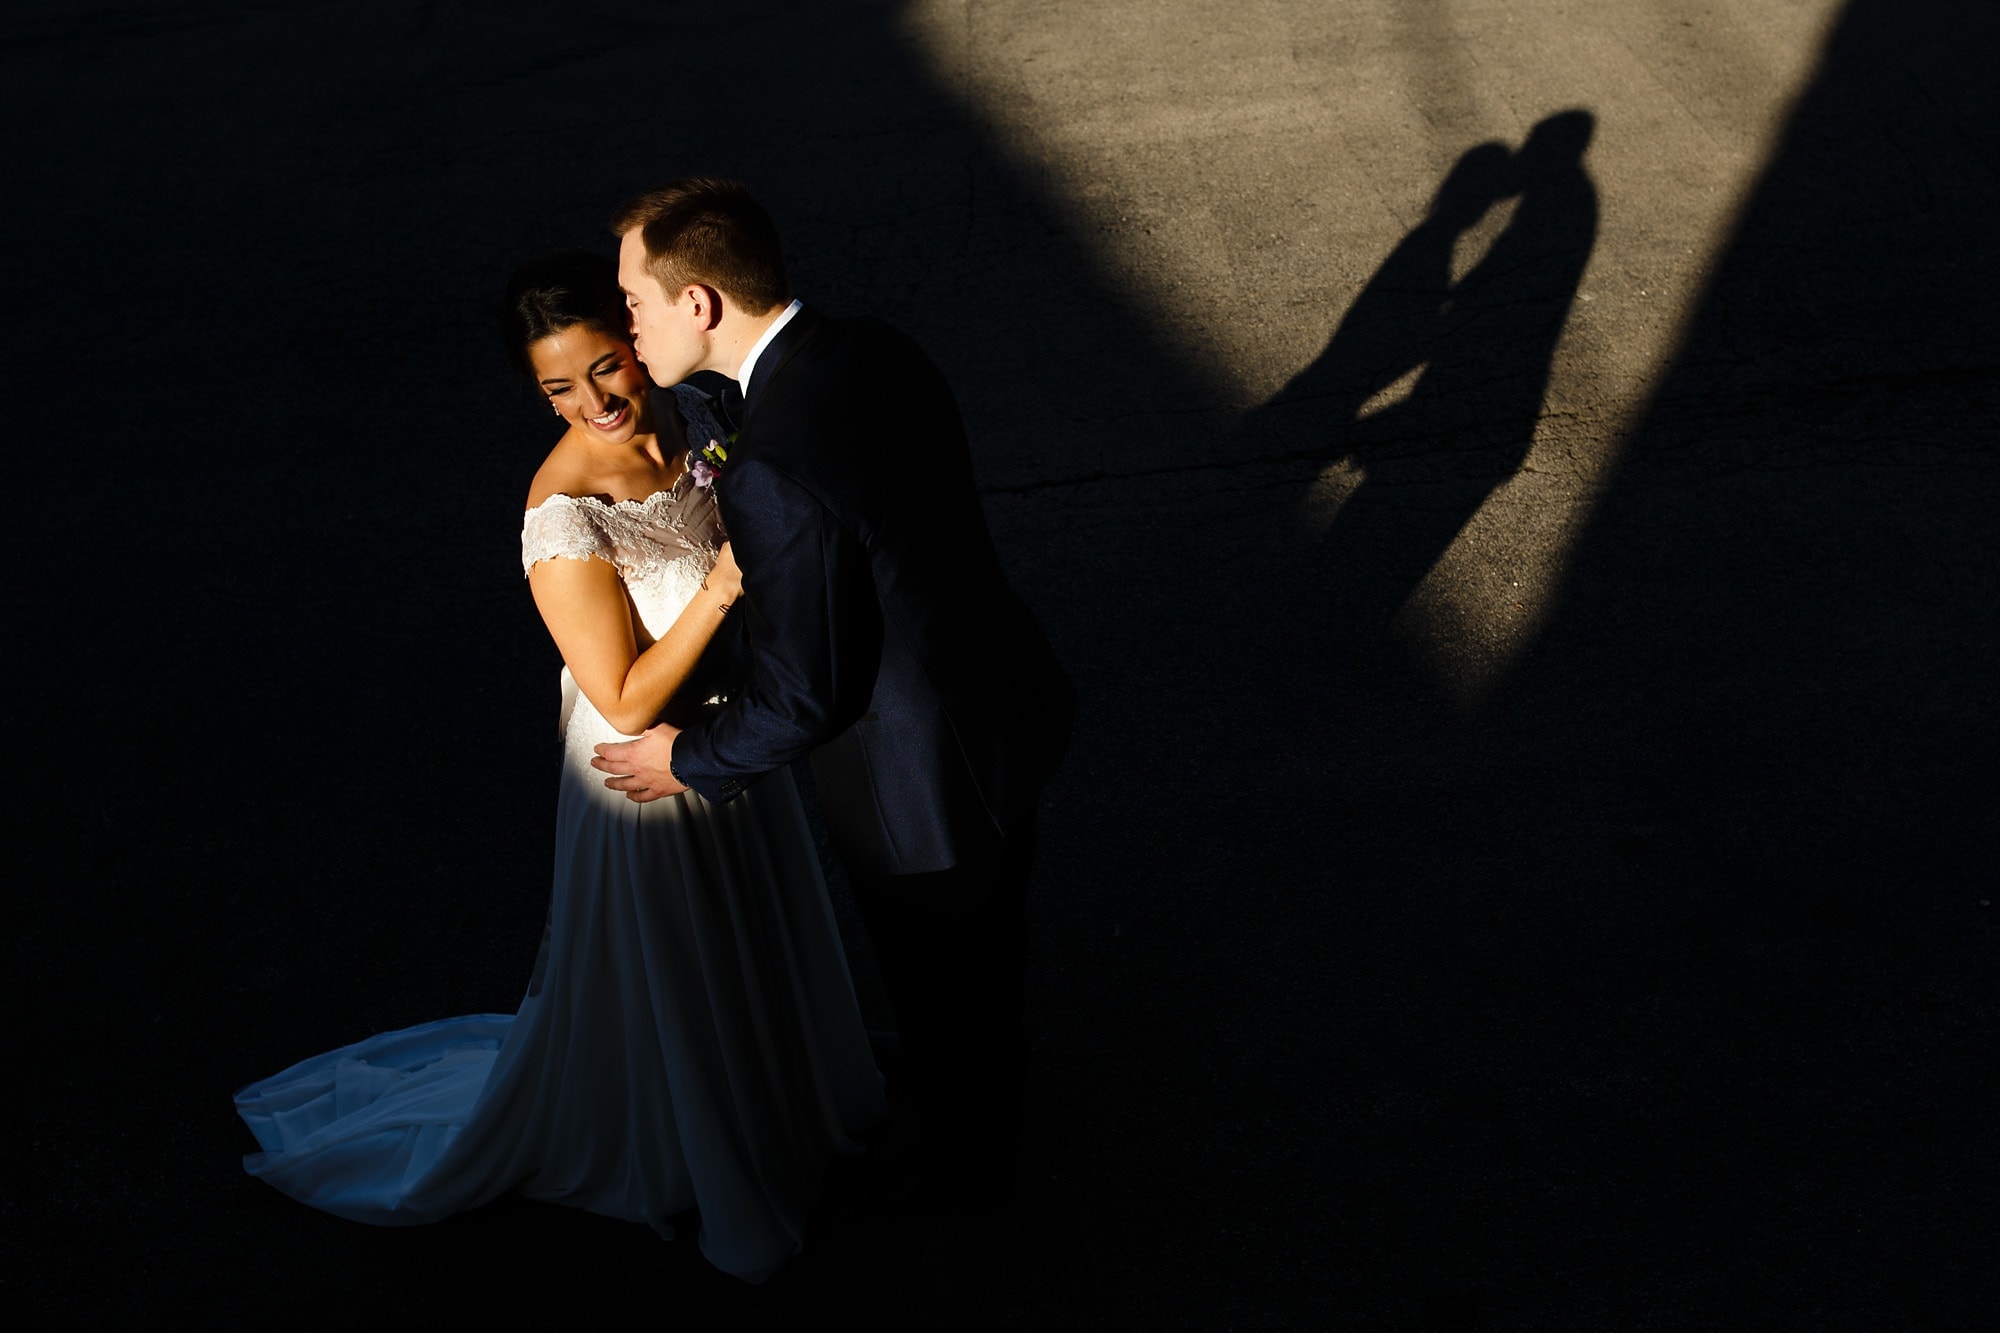 A shaft of light illuminates Bryce and Johnna during a kiss on the cheek outside of Loft on Lake in Chicago.